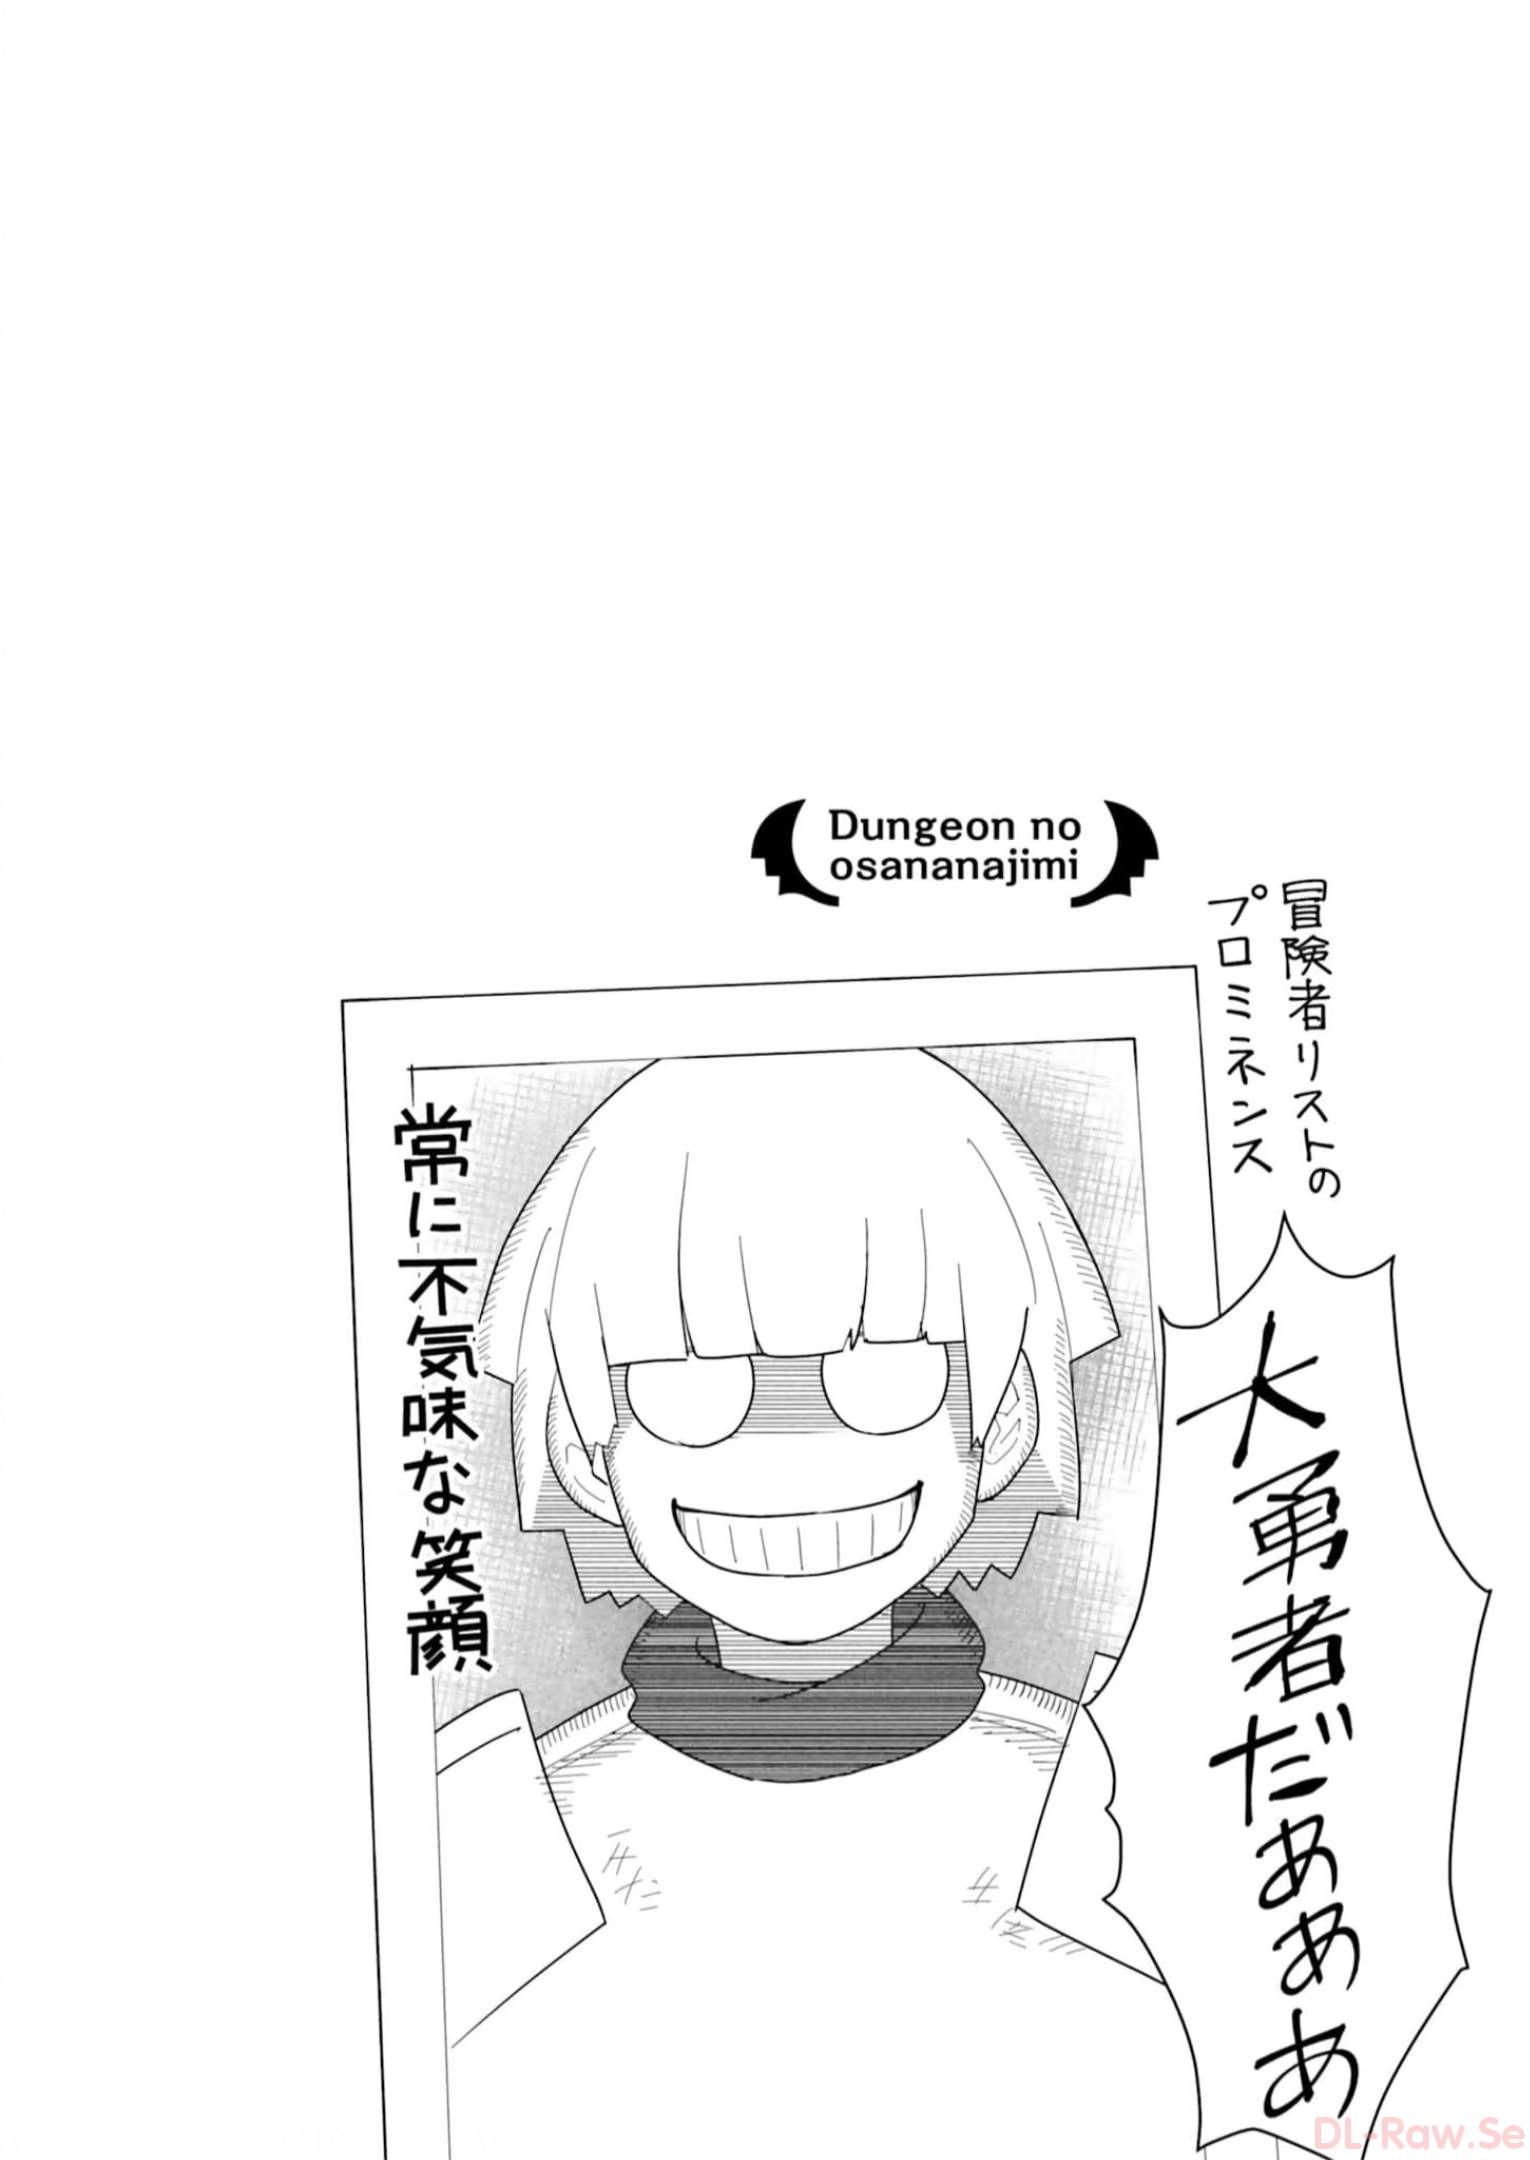 Dungeon Friends Forever Dungeon’s Childhood Friend ダンジョンの幼なじみ 第27.5話 - Page 1